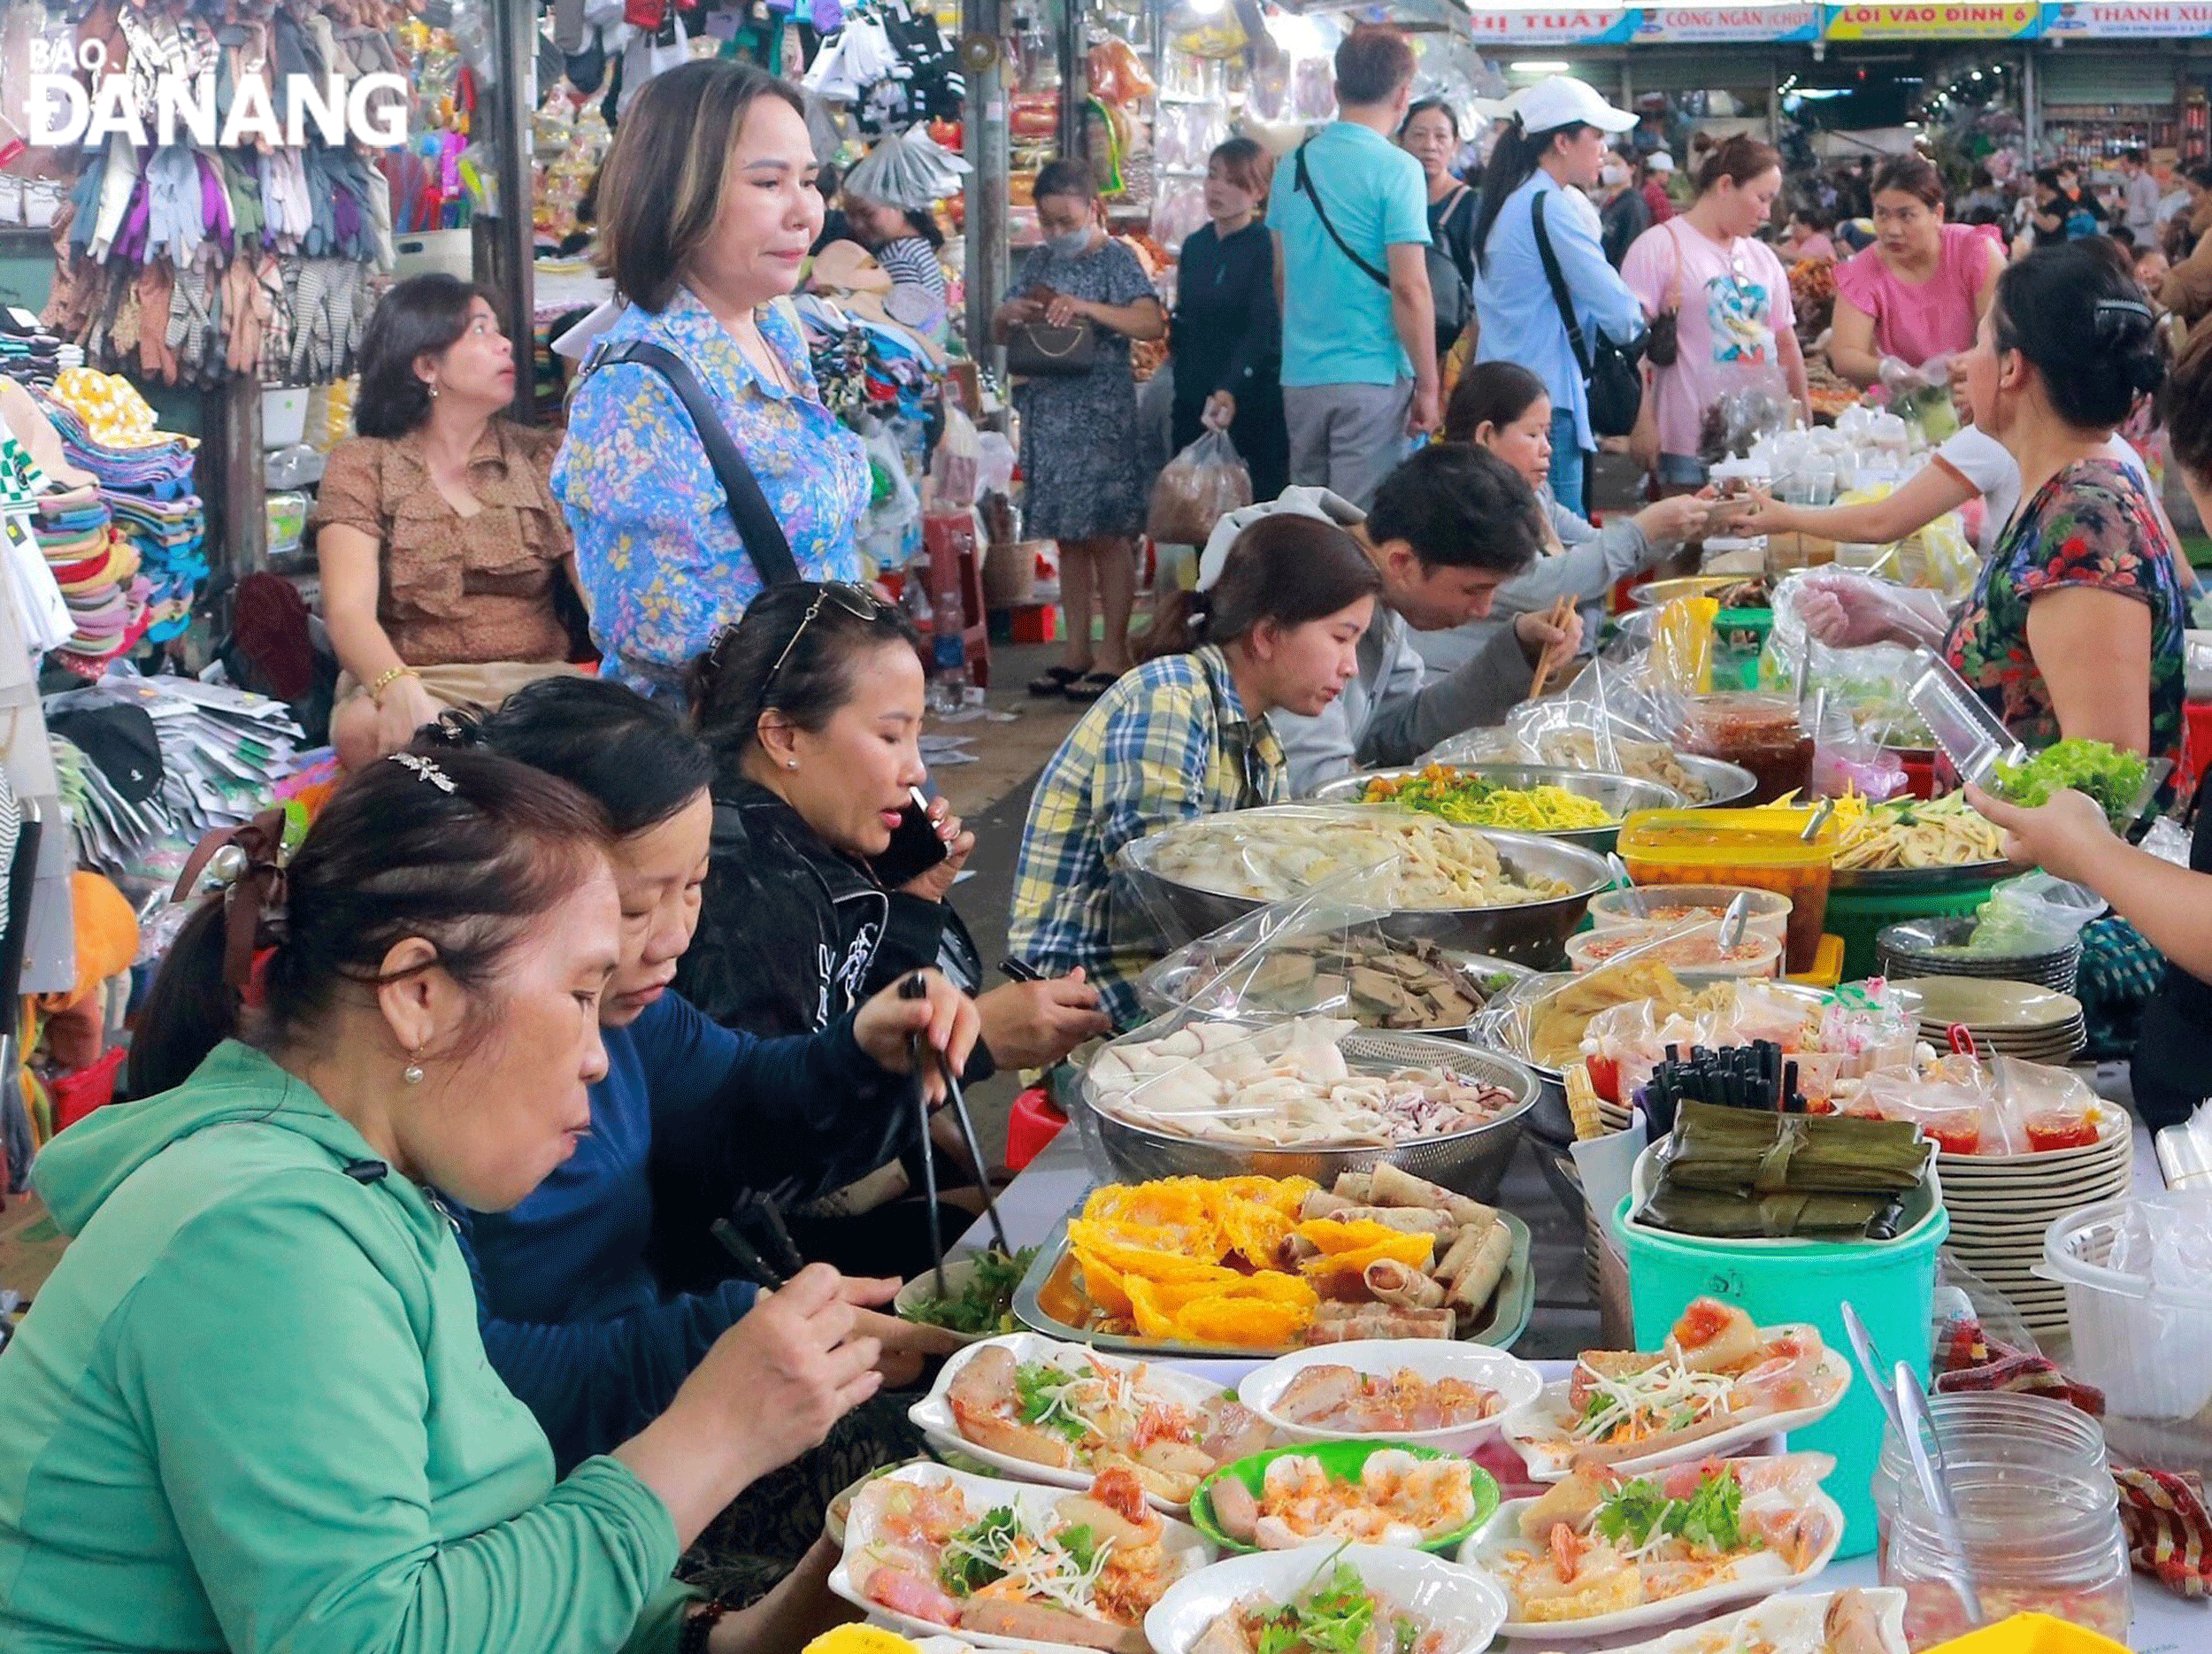 Local specialties are always attractive to tourists. Photo: DIEP NHU